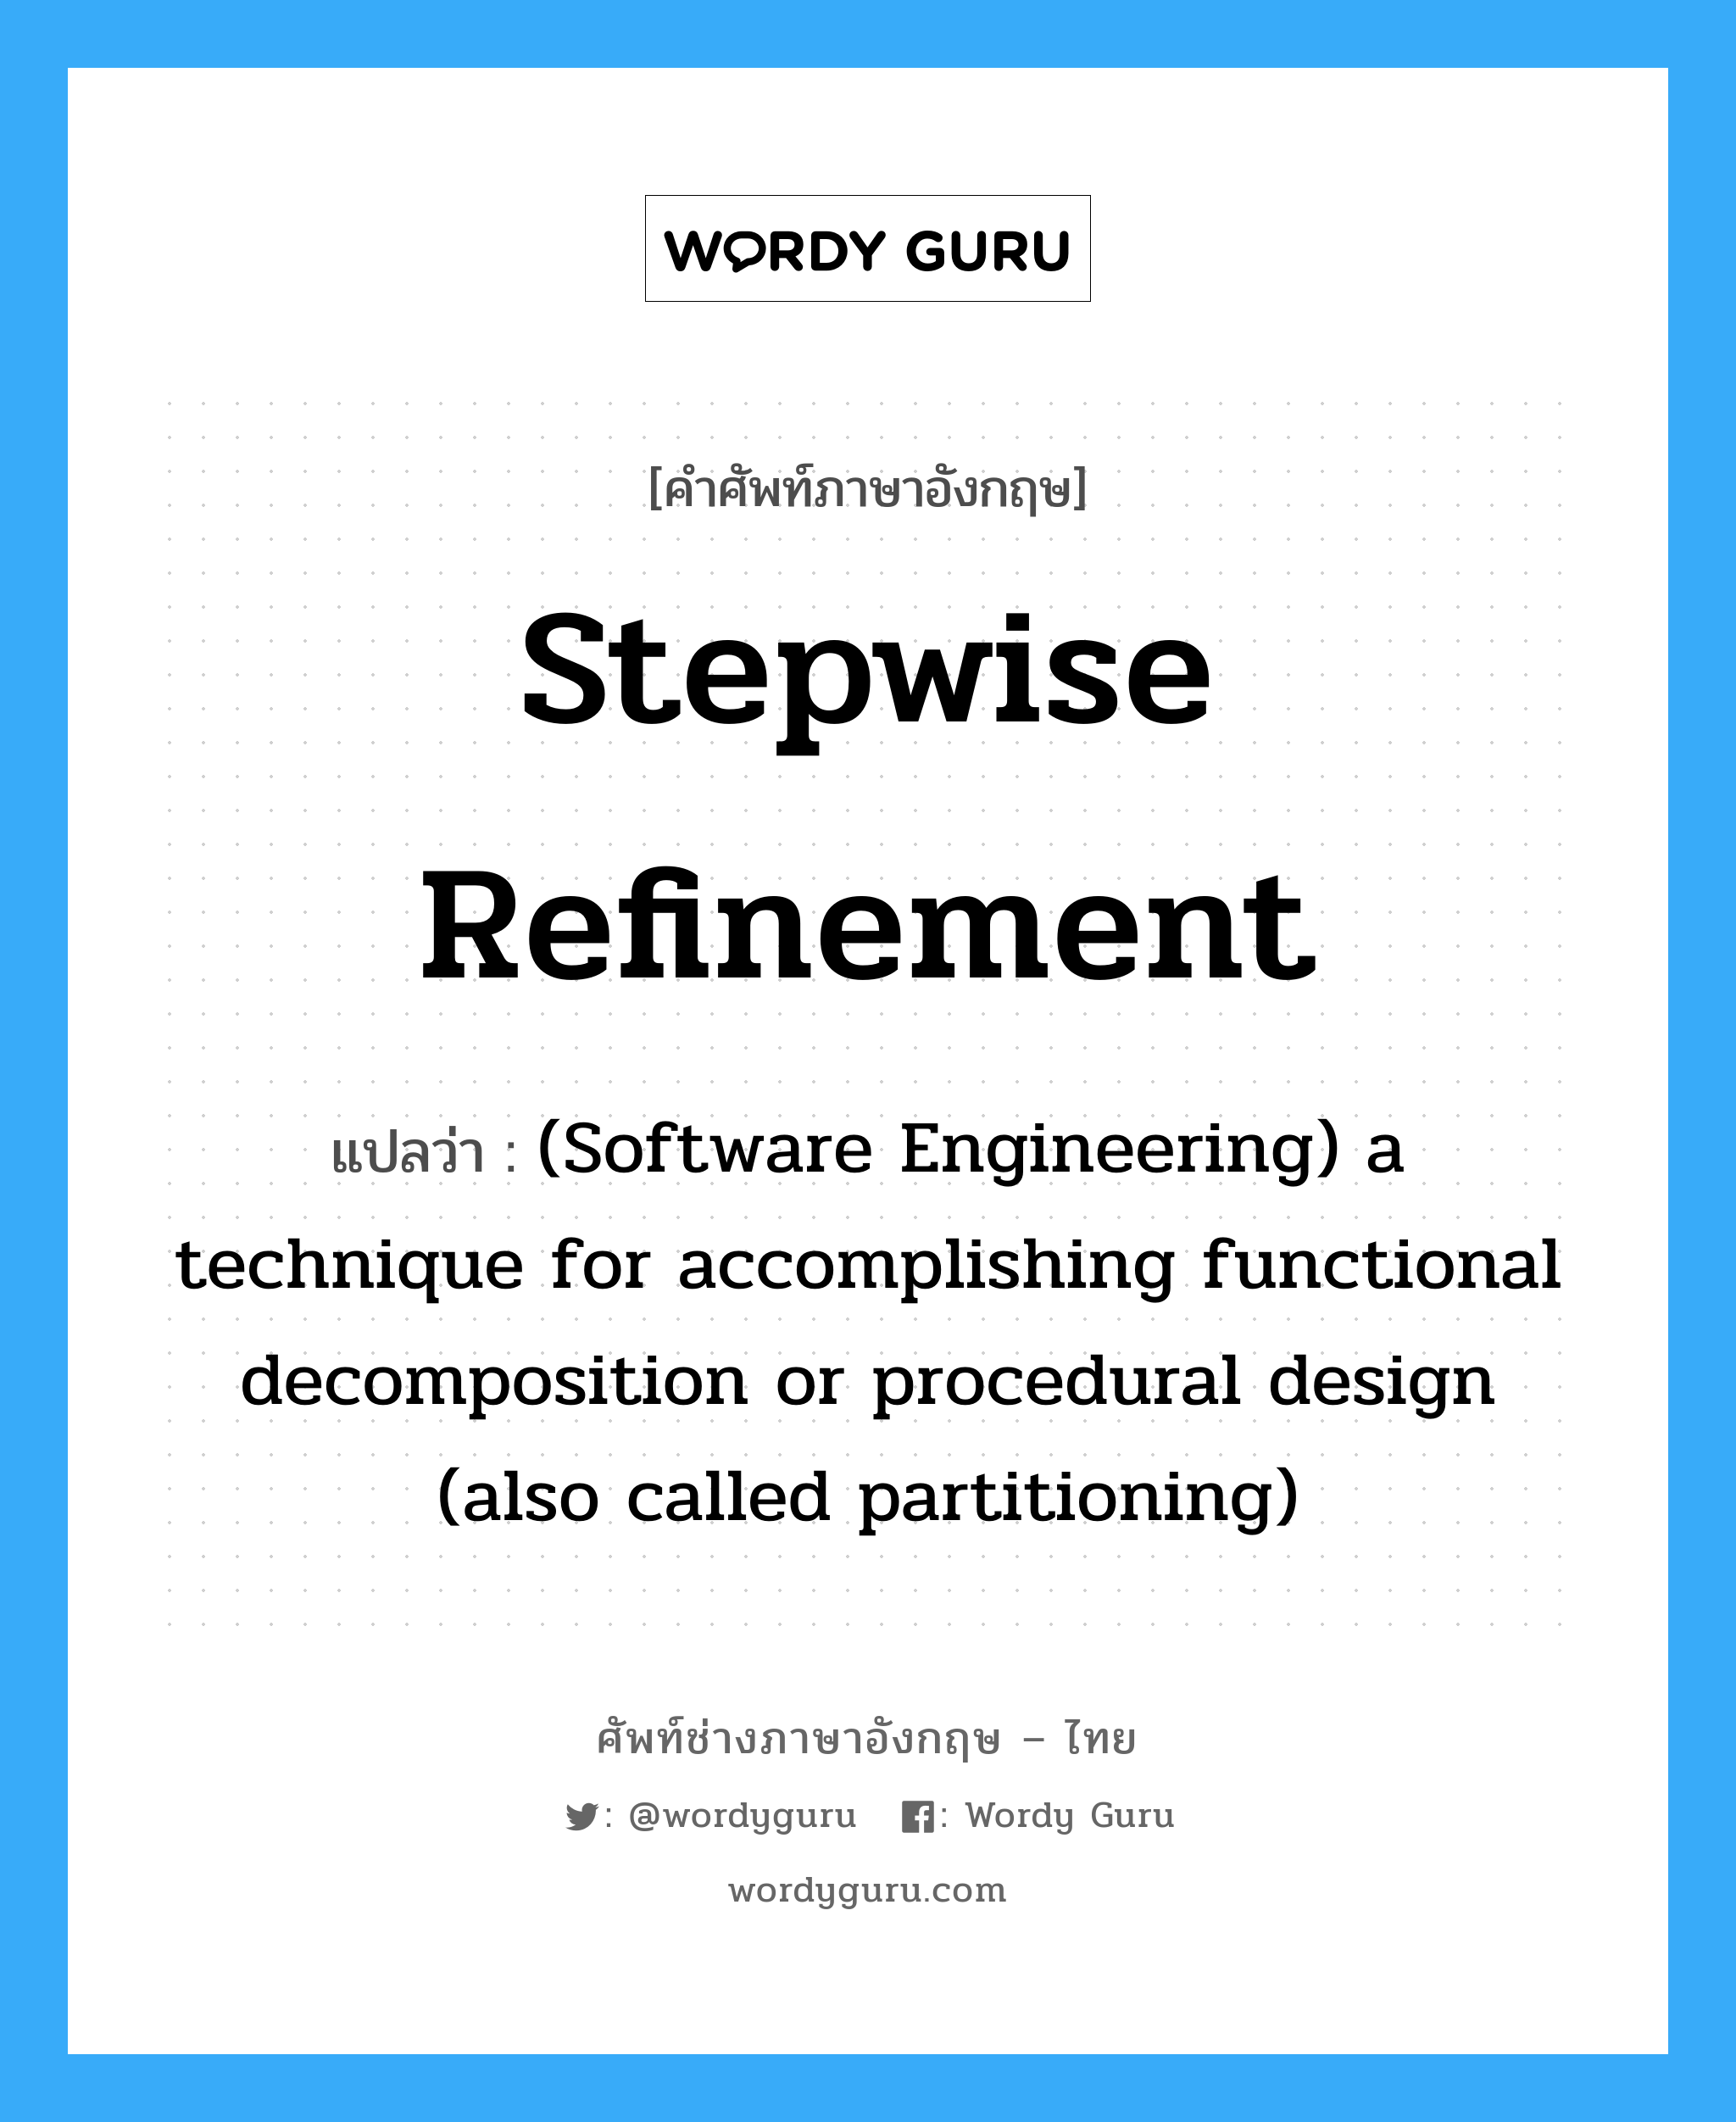 Stepwise refinement แปลว่า?, คำศัพท์ช่างภาษาอังกฤษ - ไทย Stepwise refinement คำศัพท์ภาษาอังกฤษ Stepwise refinement แปลว่า (Software Engineering) a technique for accomplishing functional decomposition or procedural design (also called partitioning)